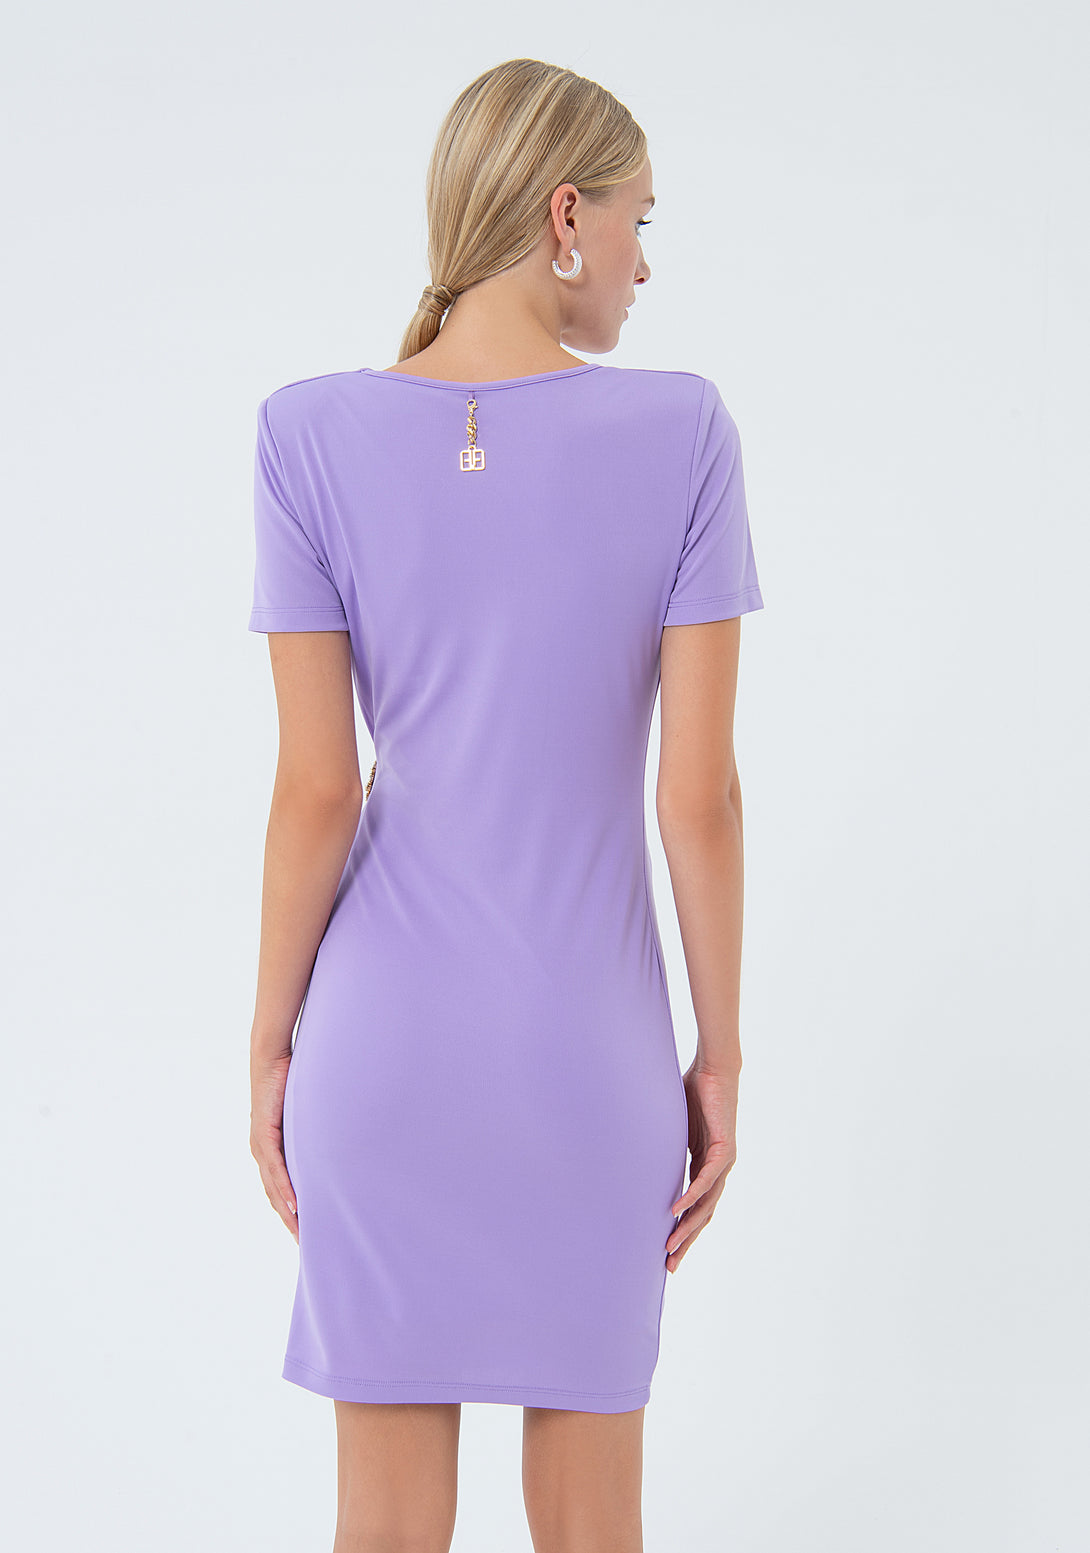 Mini dress slim fit made with technical fabric Fracomina FQ24SD1015W43901-185-4